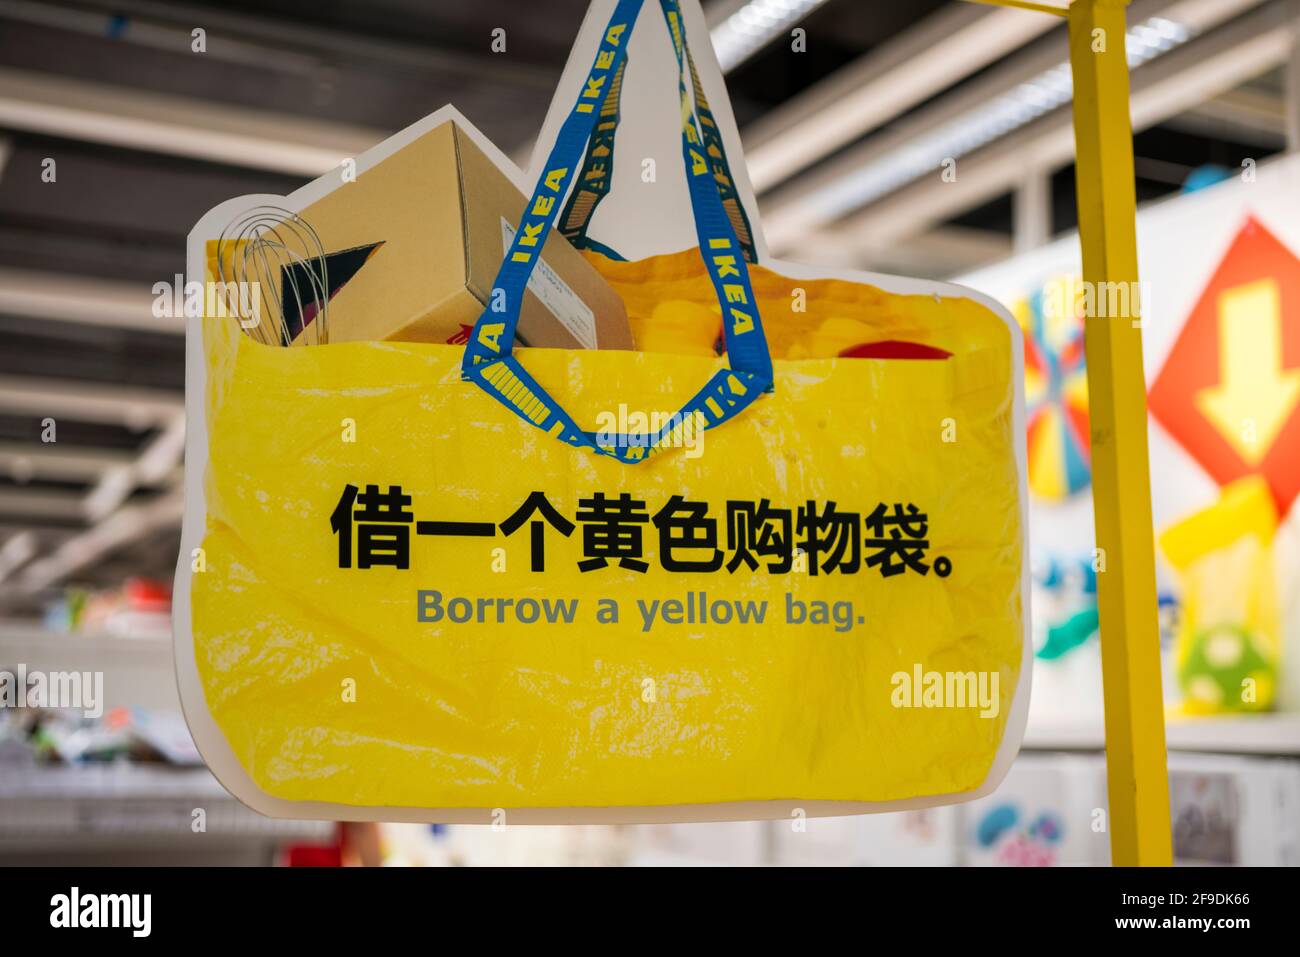 Shenzhen, China, September, 2019. Shenzhen IKEA Mall, borrow a yellow bag. Originating from a Nordic warehouse chain, it sells assembled furniture and Stock Photo